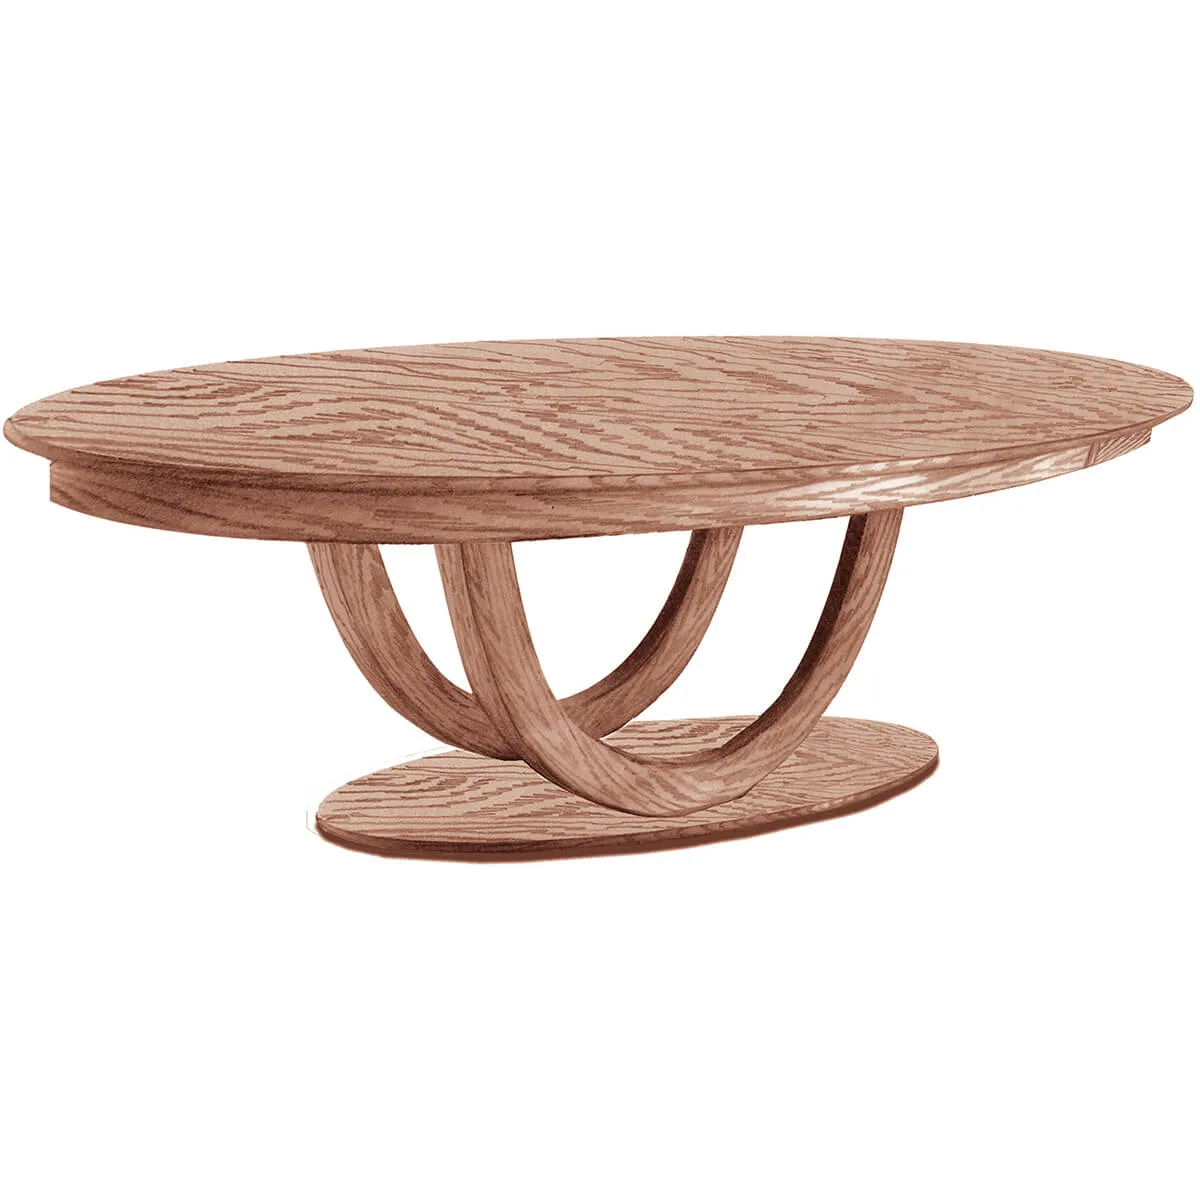 Woodville Oval Dining Table